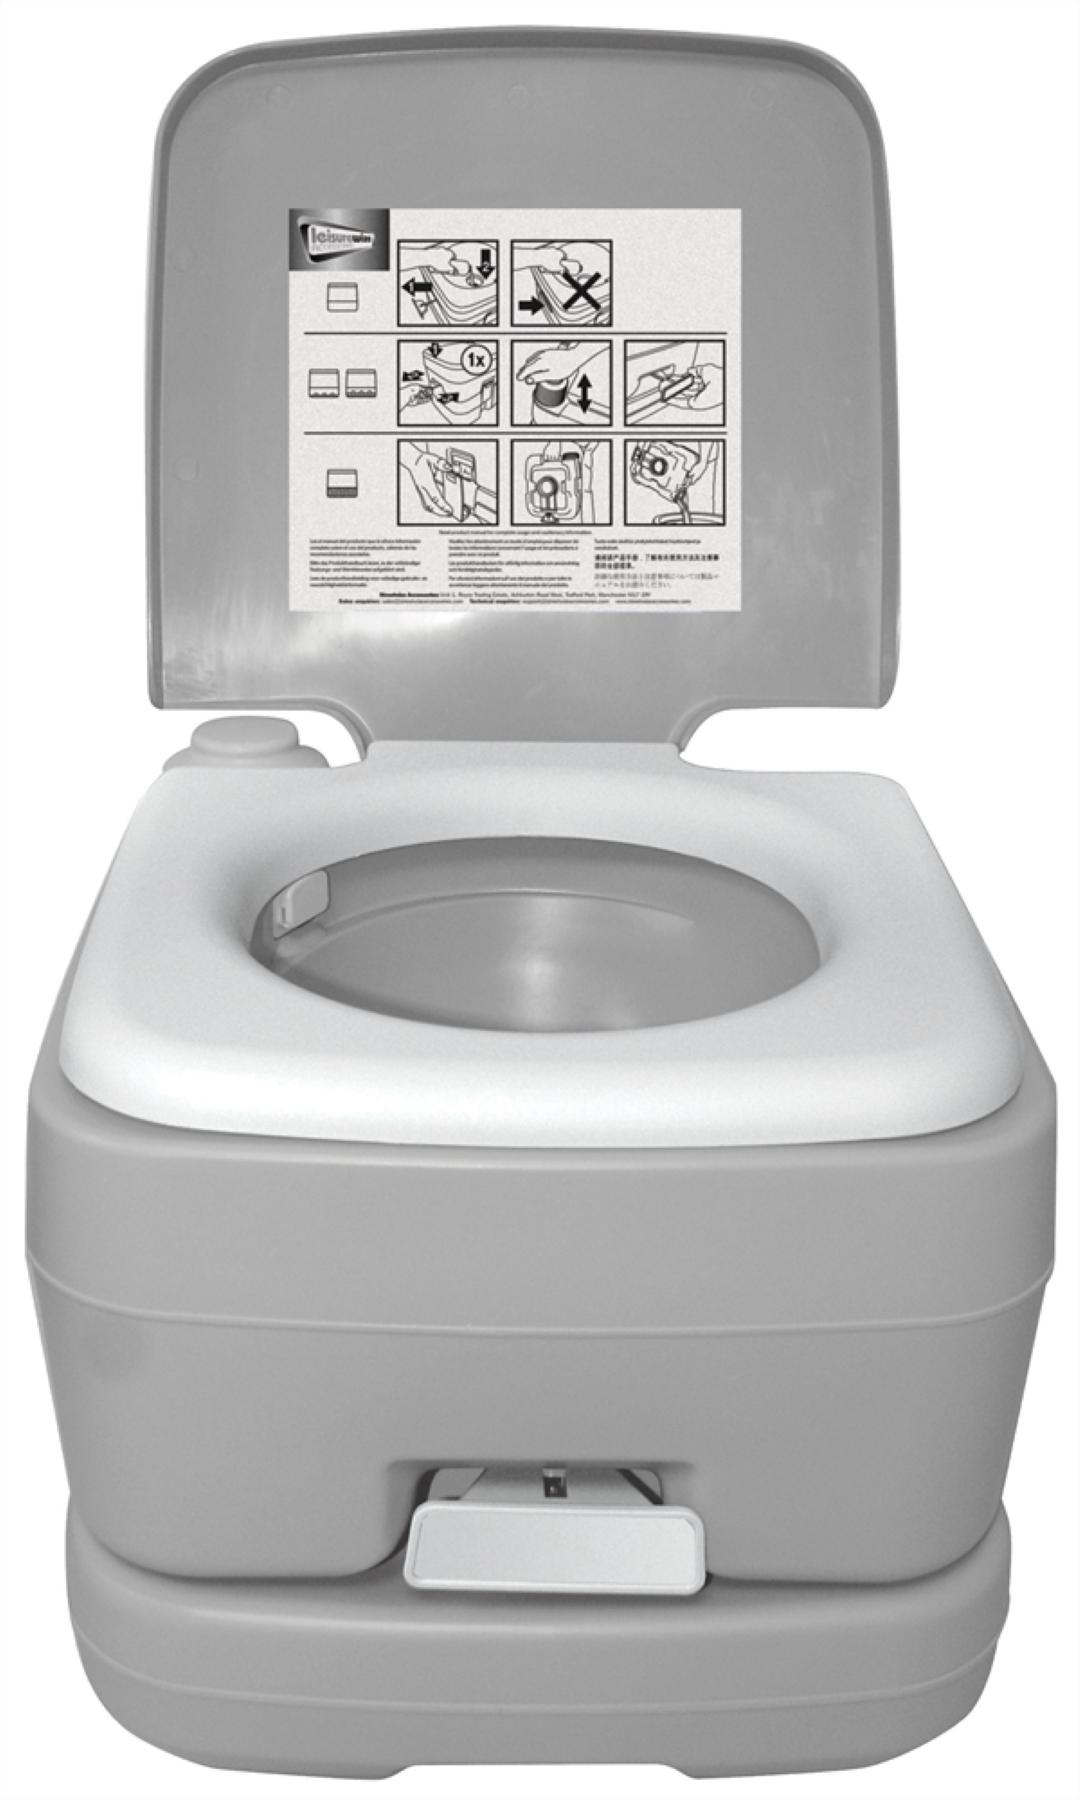 10L PORTABLE FLUSHING CAMPING TOILET-Leisurewize-Campers and Leisure